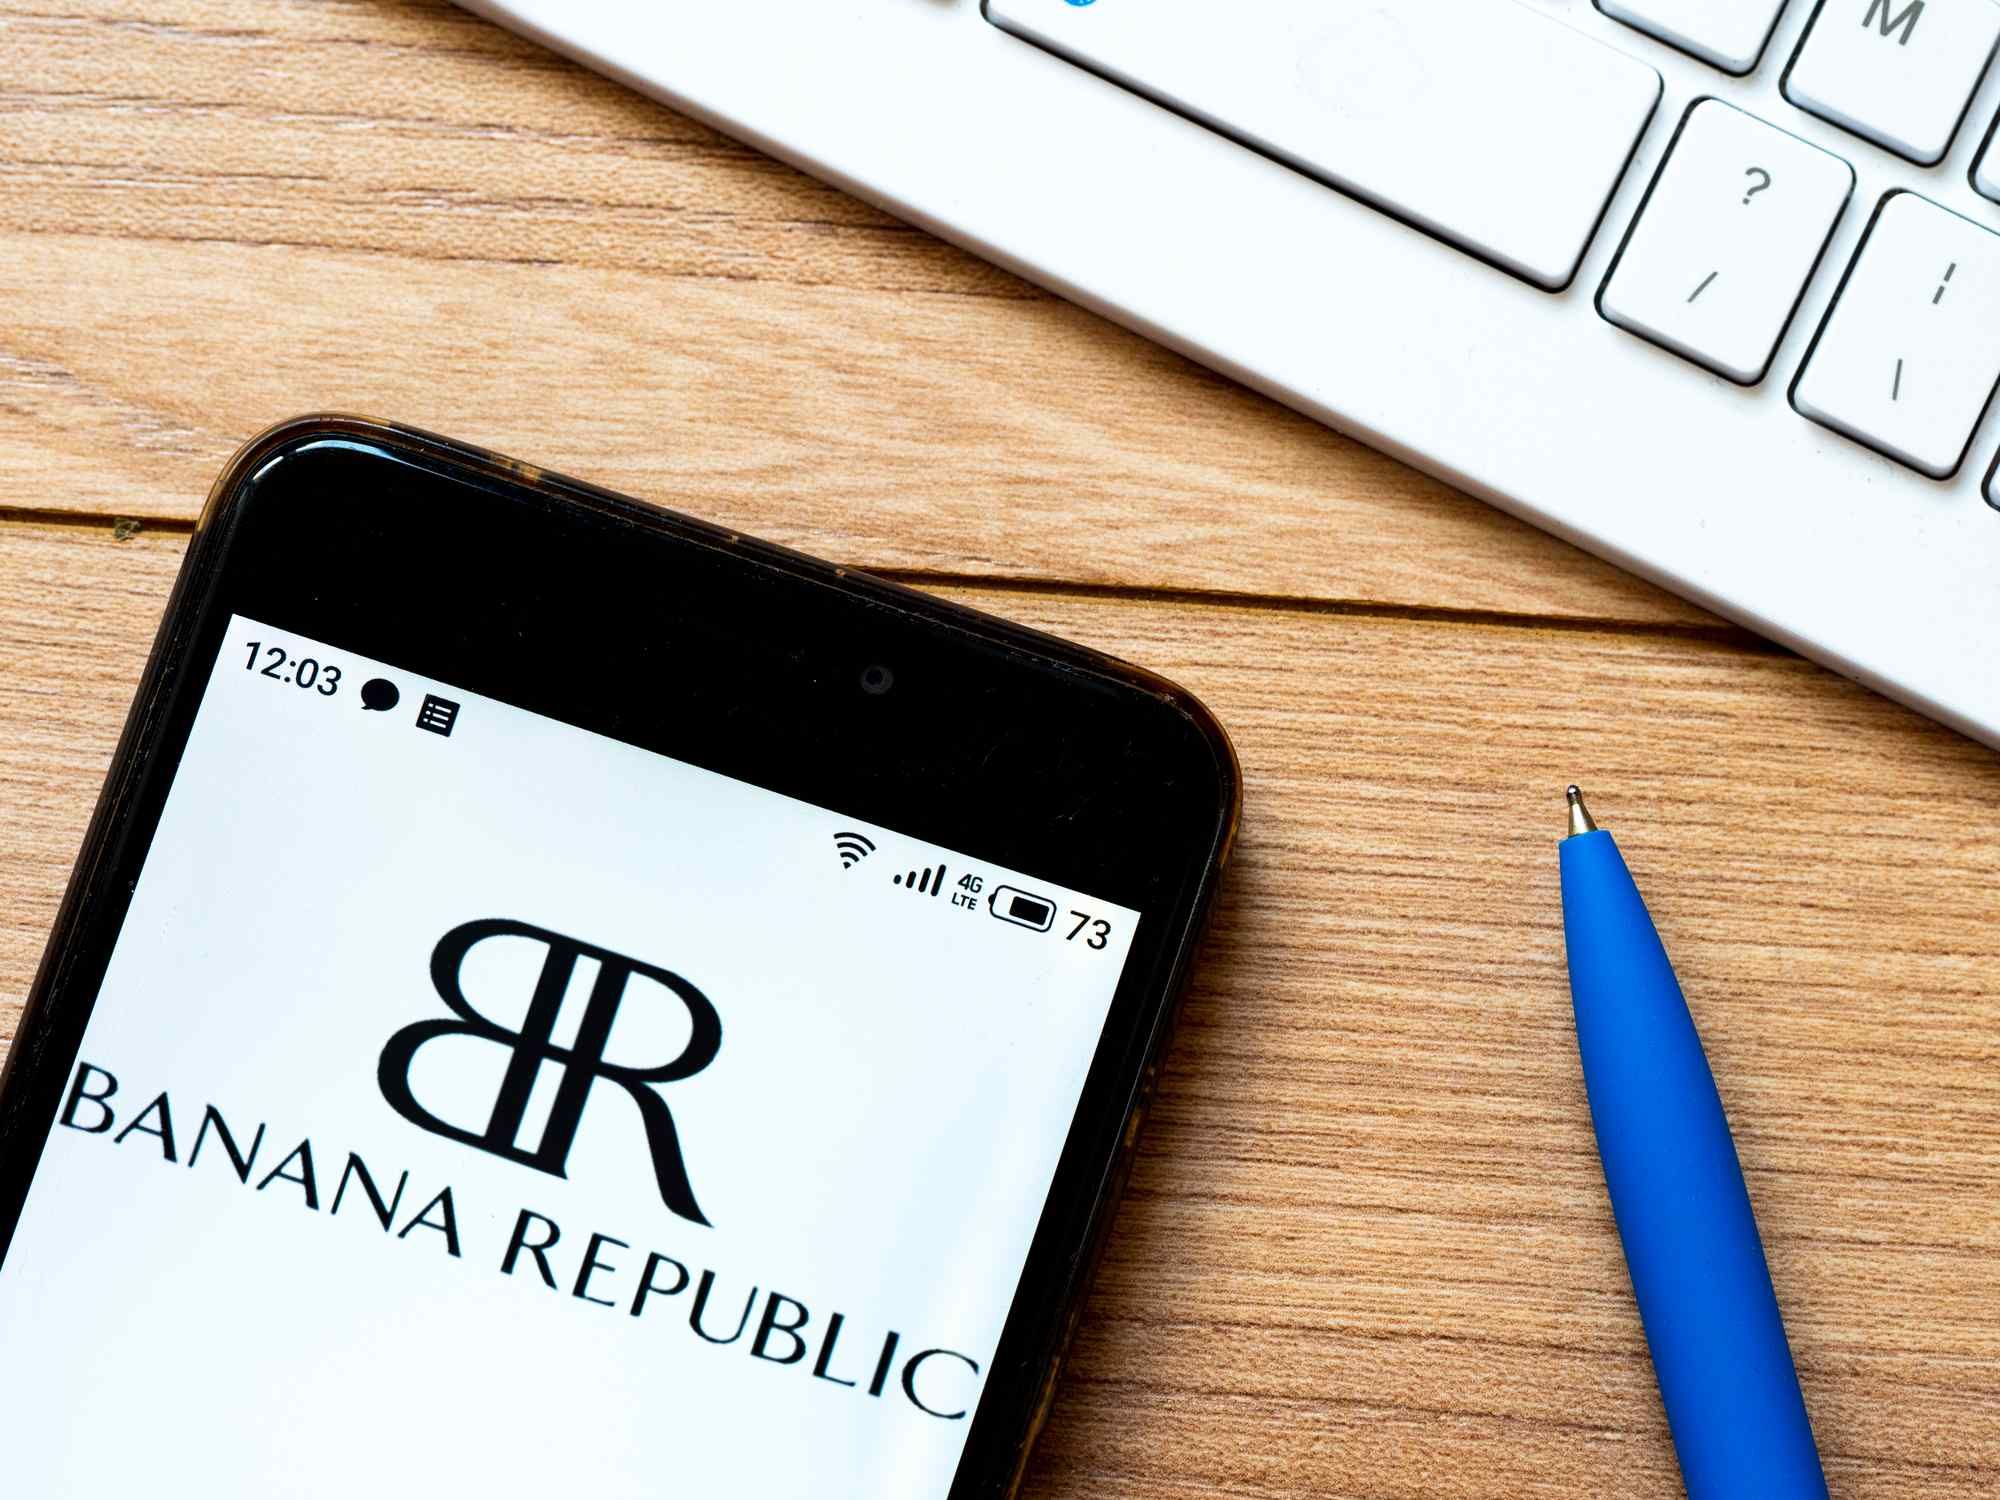 Banana Republic and other retailers face a lawsuit over a privacy breach.